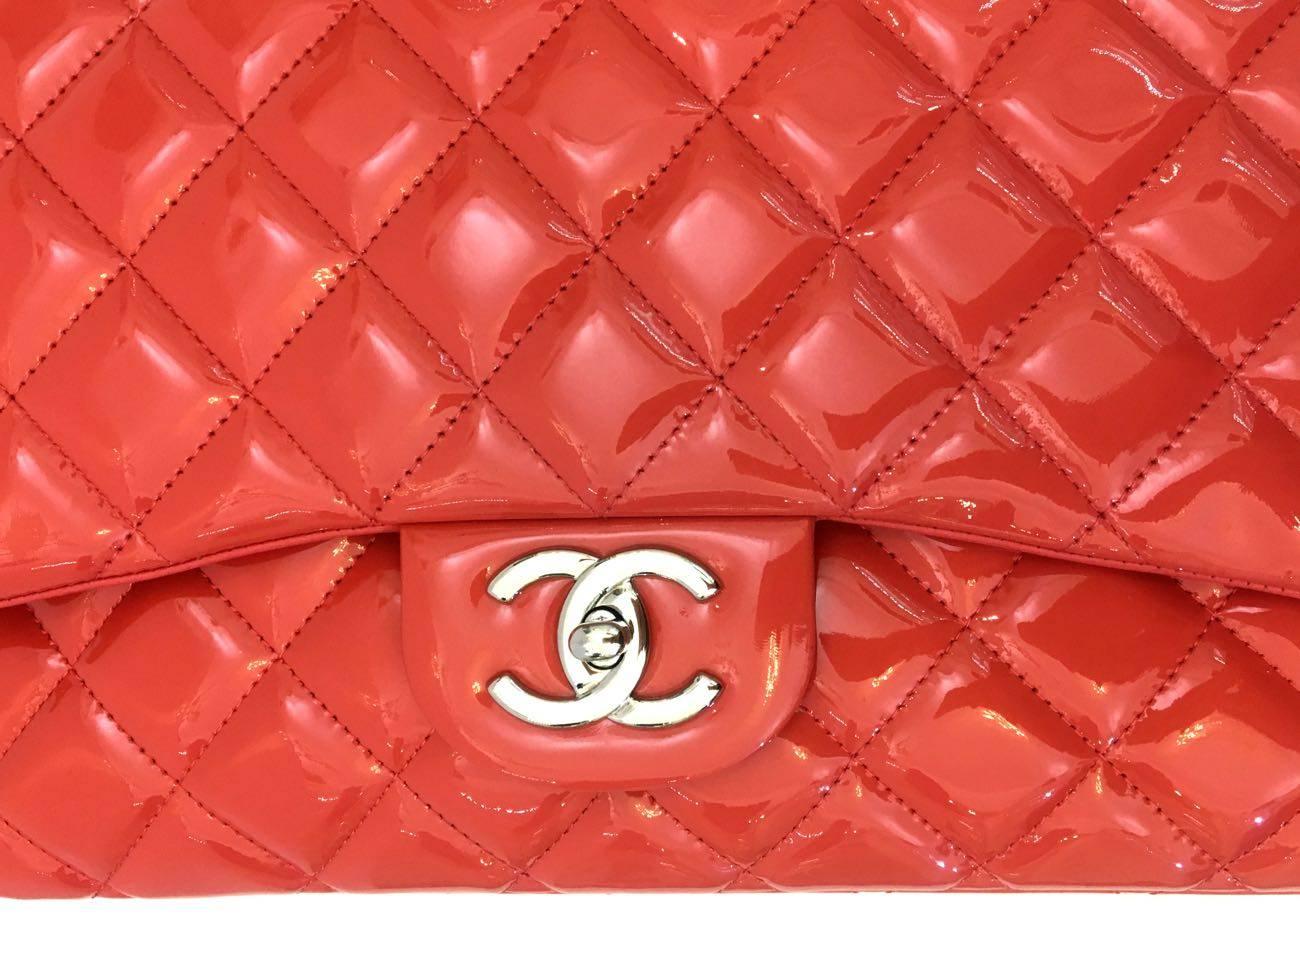 Women's Chanel Bag Maxi Jumbo Coral Vernis Leather, 2012